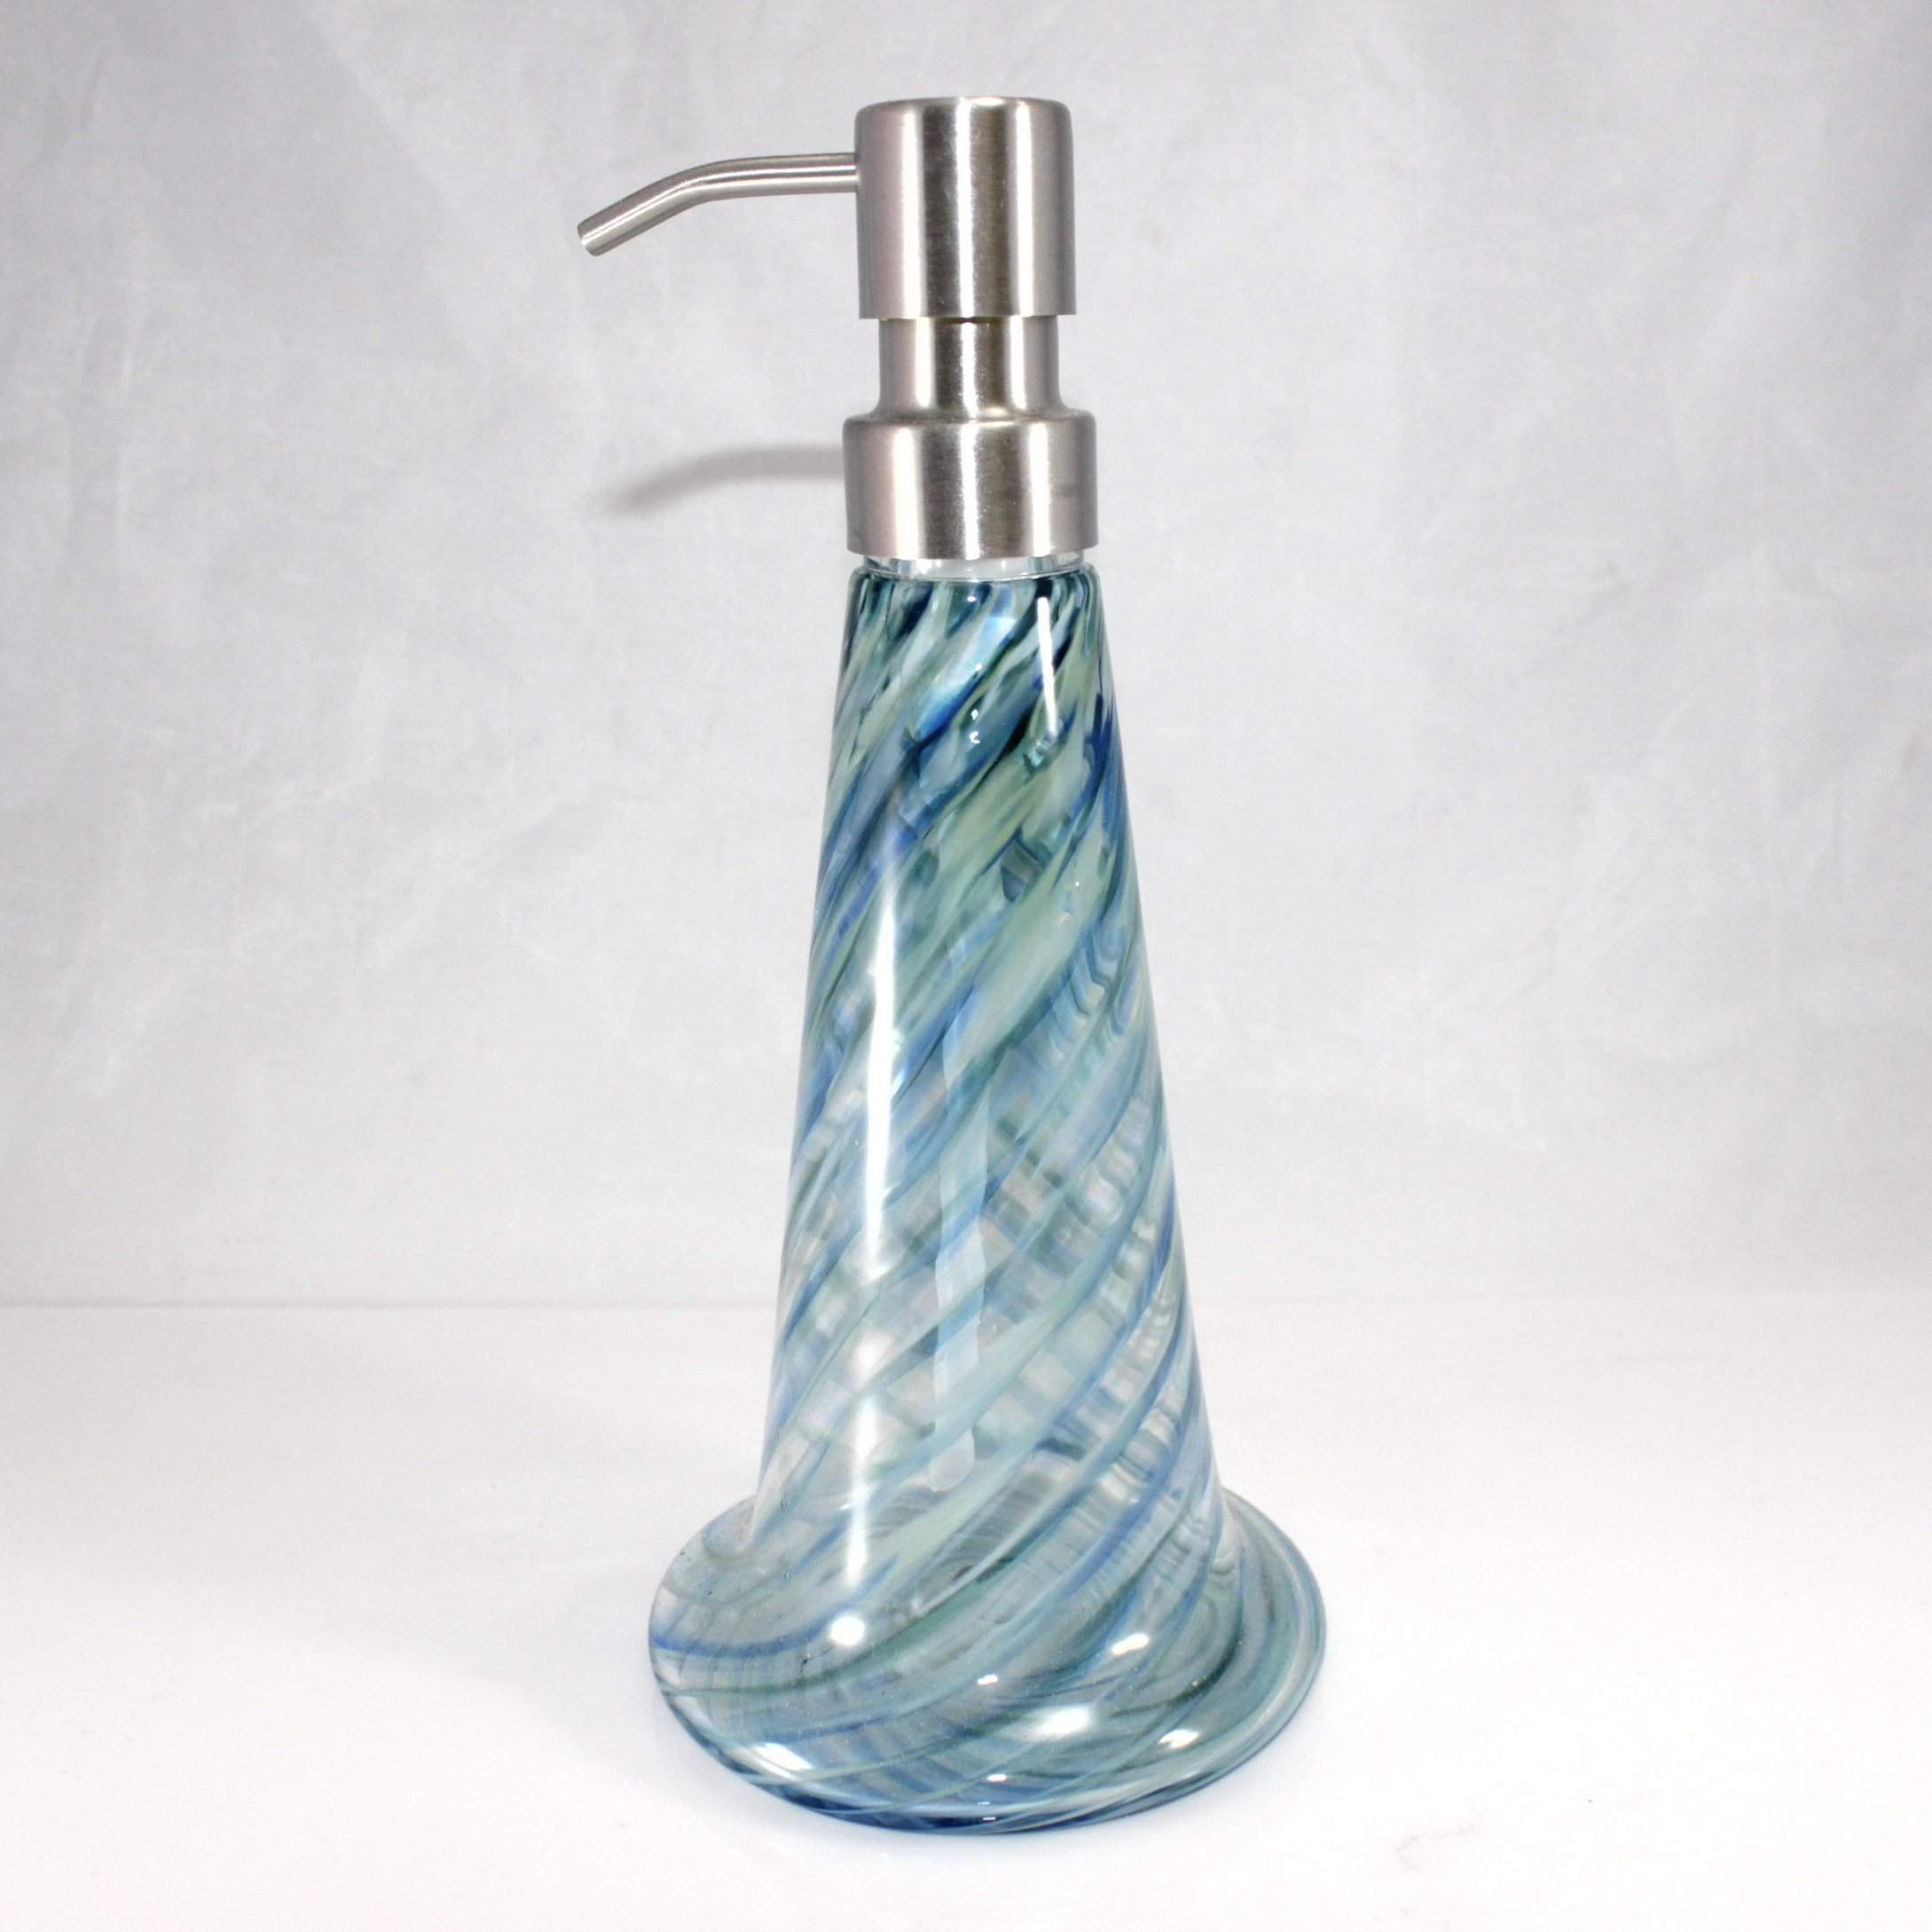 Handblown Glass Soap Dispenser Available in Many Colors – Mirador